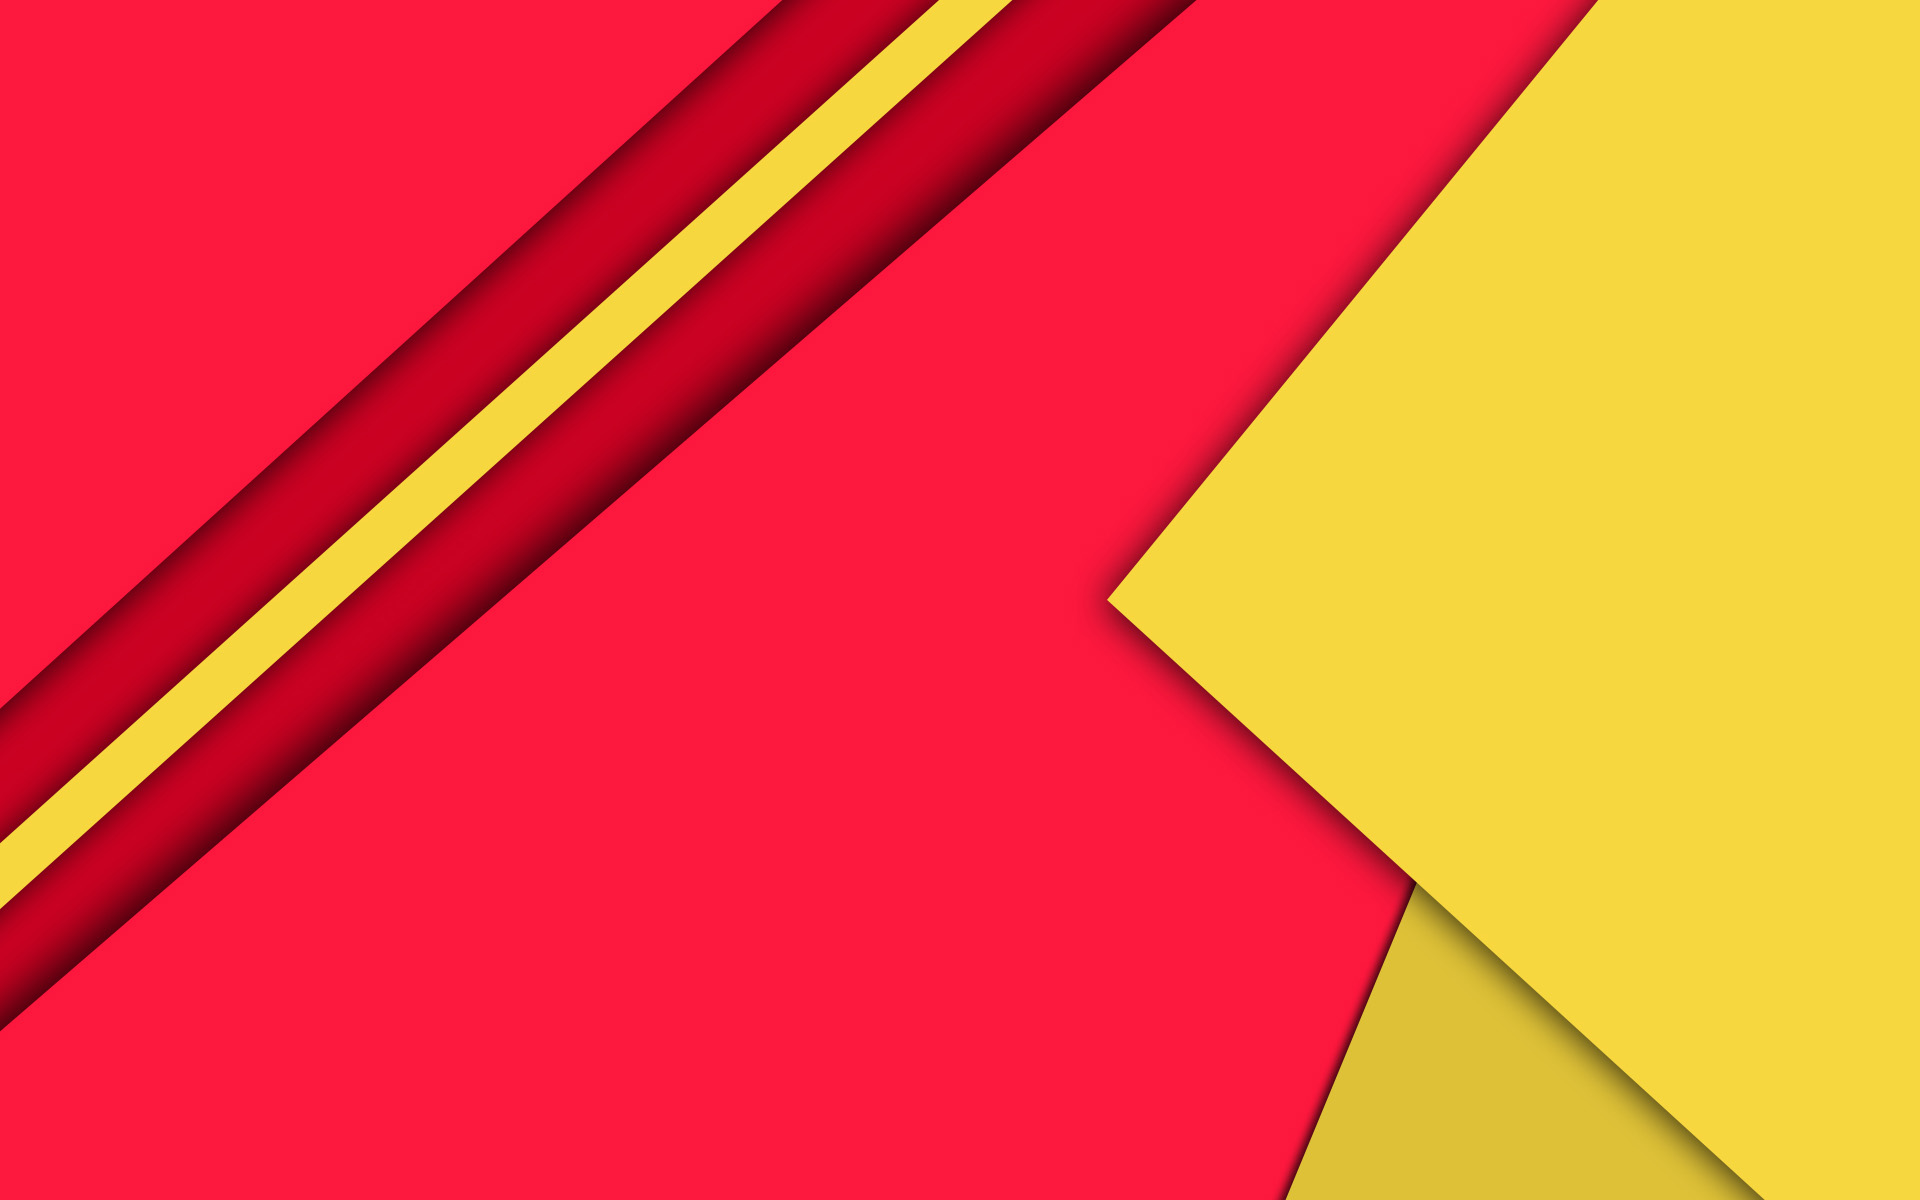 Download wallpapers material design, red and yellow, geometric shapes,  lines, lollipop, geometry, creative, strips, red backgrounds, abstract art  for desktop with resolution 1920x1200. High Quality HD pictures wallpapers